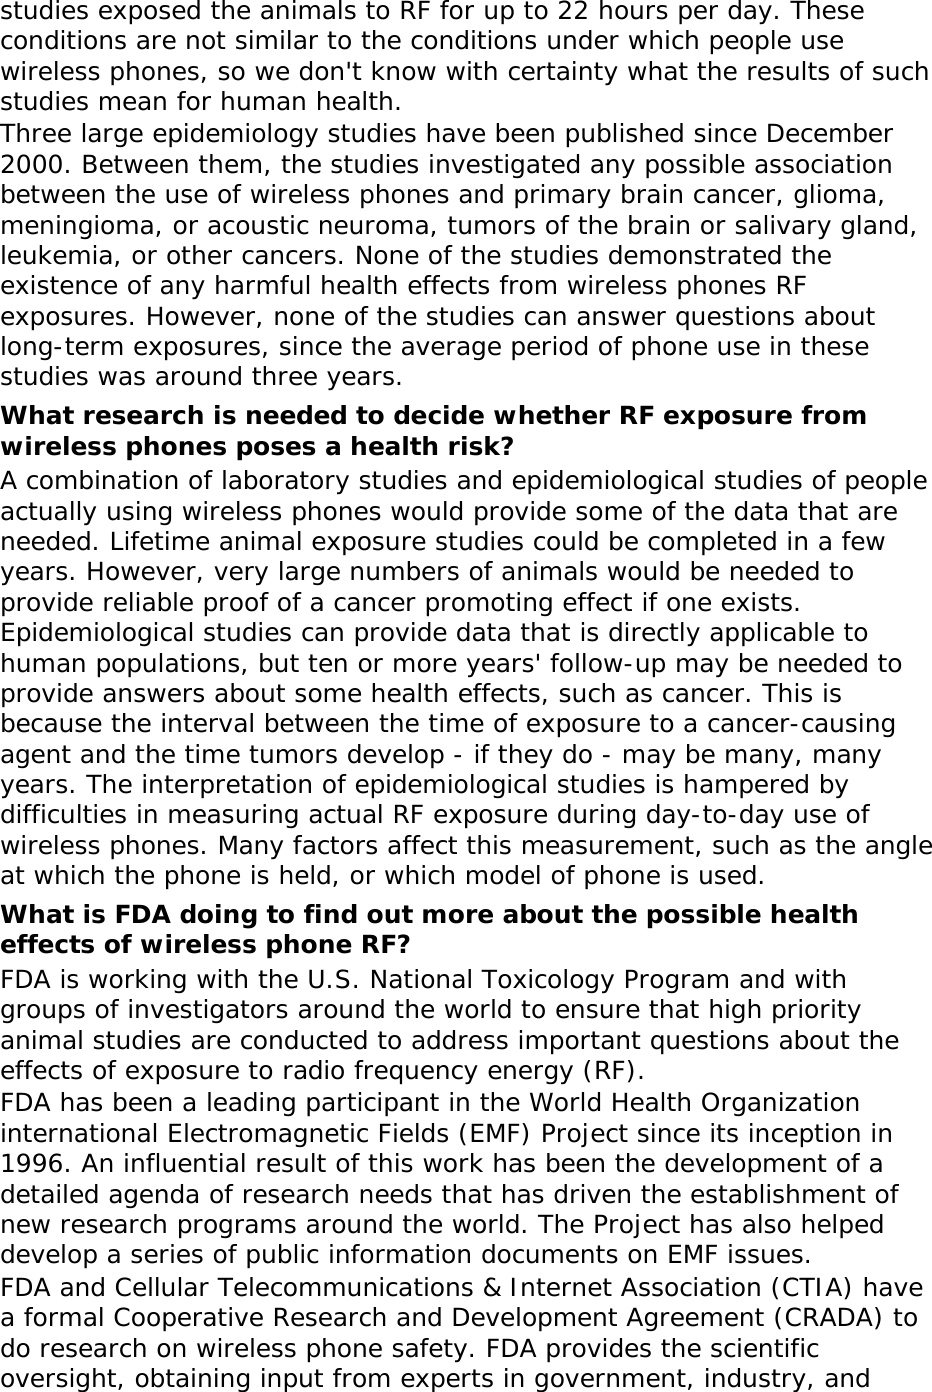 studies exposed the animals to RF for up to 22 hours per day. These conditions are not similar to the conditions under which people use wireless phones, so we don&apos;t know with certainty what the results of such studies mean for human health. Three large epidemiology studies have been published since December 2000. Between them, the studies investigated any possible association between the use of wireless phones and primary brain cancer, glioma, meningioma, or acoustic neuroma, tumors of the brain or salivary gland, leukemia, or other cancers. None of the studies demonstrated the existence of any harmful health effects from wireless phones RF exposures. However, none of the studies can answer questions about long-term exposures, since the average period of phone use in these studies was around three years. What research is needed to decide whether RF exposure from wireless phones poses a health risk? A combination of laboratory studies and epidemiological studies of people actually using wireless phones would provide some of the data that are needed. Lifetime animal exposure studies could be completed in a few years. However, very large numbers of animals would be needed to provide reliable proof of a cancer promoting effect if one exists. Epidemiological studies can provide data that is directly applicable to human populations, but ten or more years&apos; follow-up may be needed to provide answers about some health effects, such as cancer. This is because the interval between the time of exposure to a cancer-causing agent and the time tumors develop - if they do - may be many, many years. The interpretation of epidemiological studies is hampered by difficulties in measuring actual RF exposure during day-to-day use of wireless phones. Many factors affect this measurement, such as the angle at which the phone is held, or which model of phone is used. What is FDA doing to find out more about the possible health effects of wireless phone RF? FDA is working with the U.S. National Toxicology Program and with groups of investigators around the world to ensure that high priority animal studies are conducted to address important questions about the effects of exposure to radio frequency energy (RF). FDA has been a leading participant in the World Health Organization international Electromagnetic Fields (EMF) Project since its inception in 1996. An influential result of this work has been the development of a detailed agenda of research needs that has driven the establishment of new research programs around the world. The Project has also helped develop a series of public information documents on EMF issues. FDA and Cellular Telecommunications &amp; Internet Association (CTIA) have a formal Cooperative Research and Development Agreement (CRADA) to do research on wireless phone safety. FDA provides the scientific oversight, obtaining input from experts in government, industry, and 